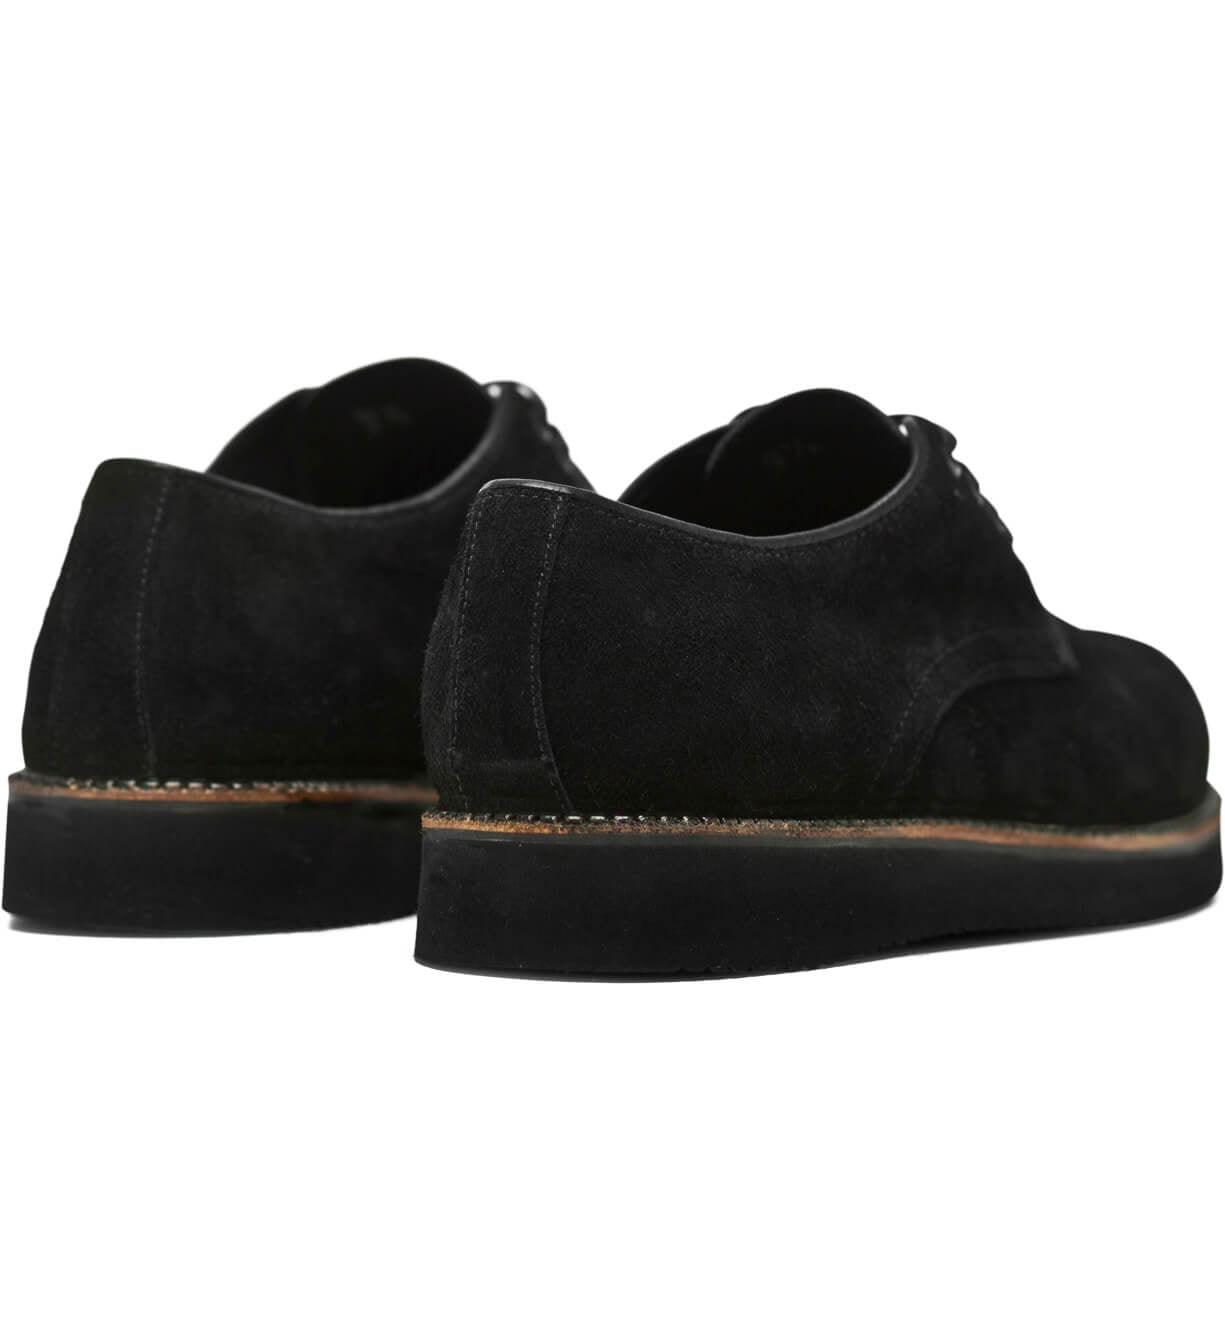 A pair of Broken Homme Michael II black suede shoes with comfort and an oxford silhouette on a white background.